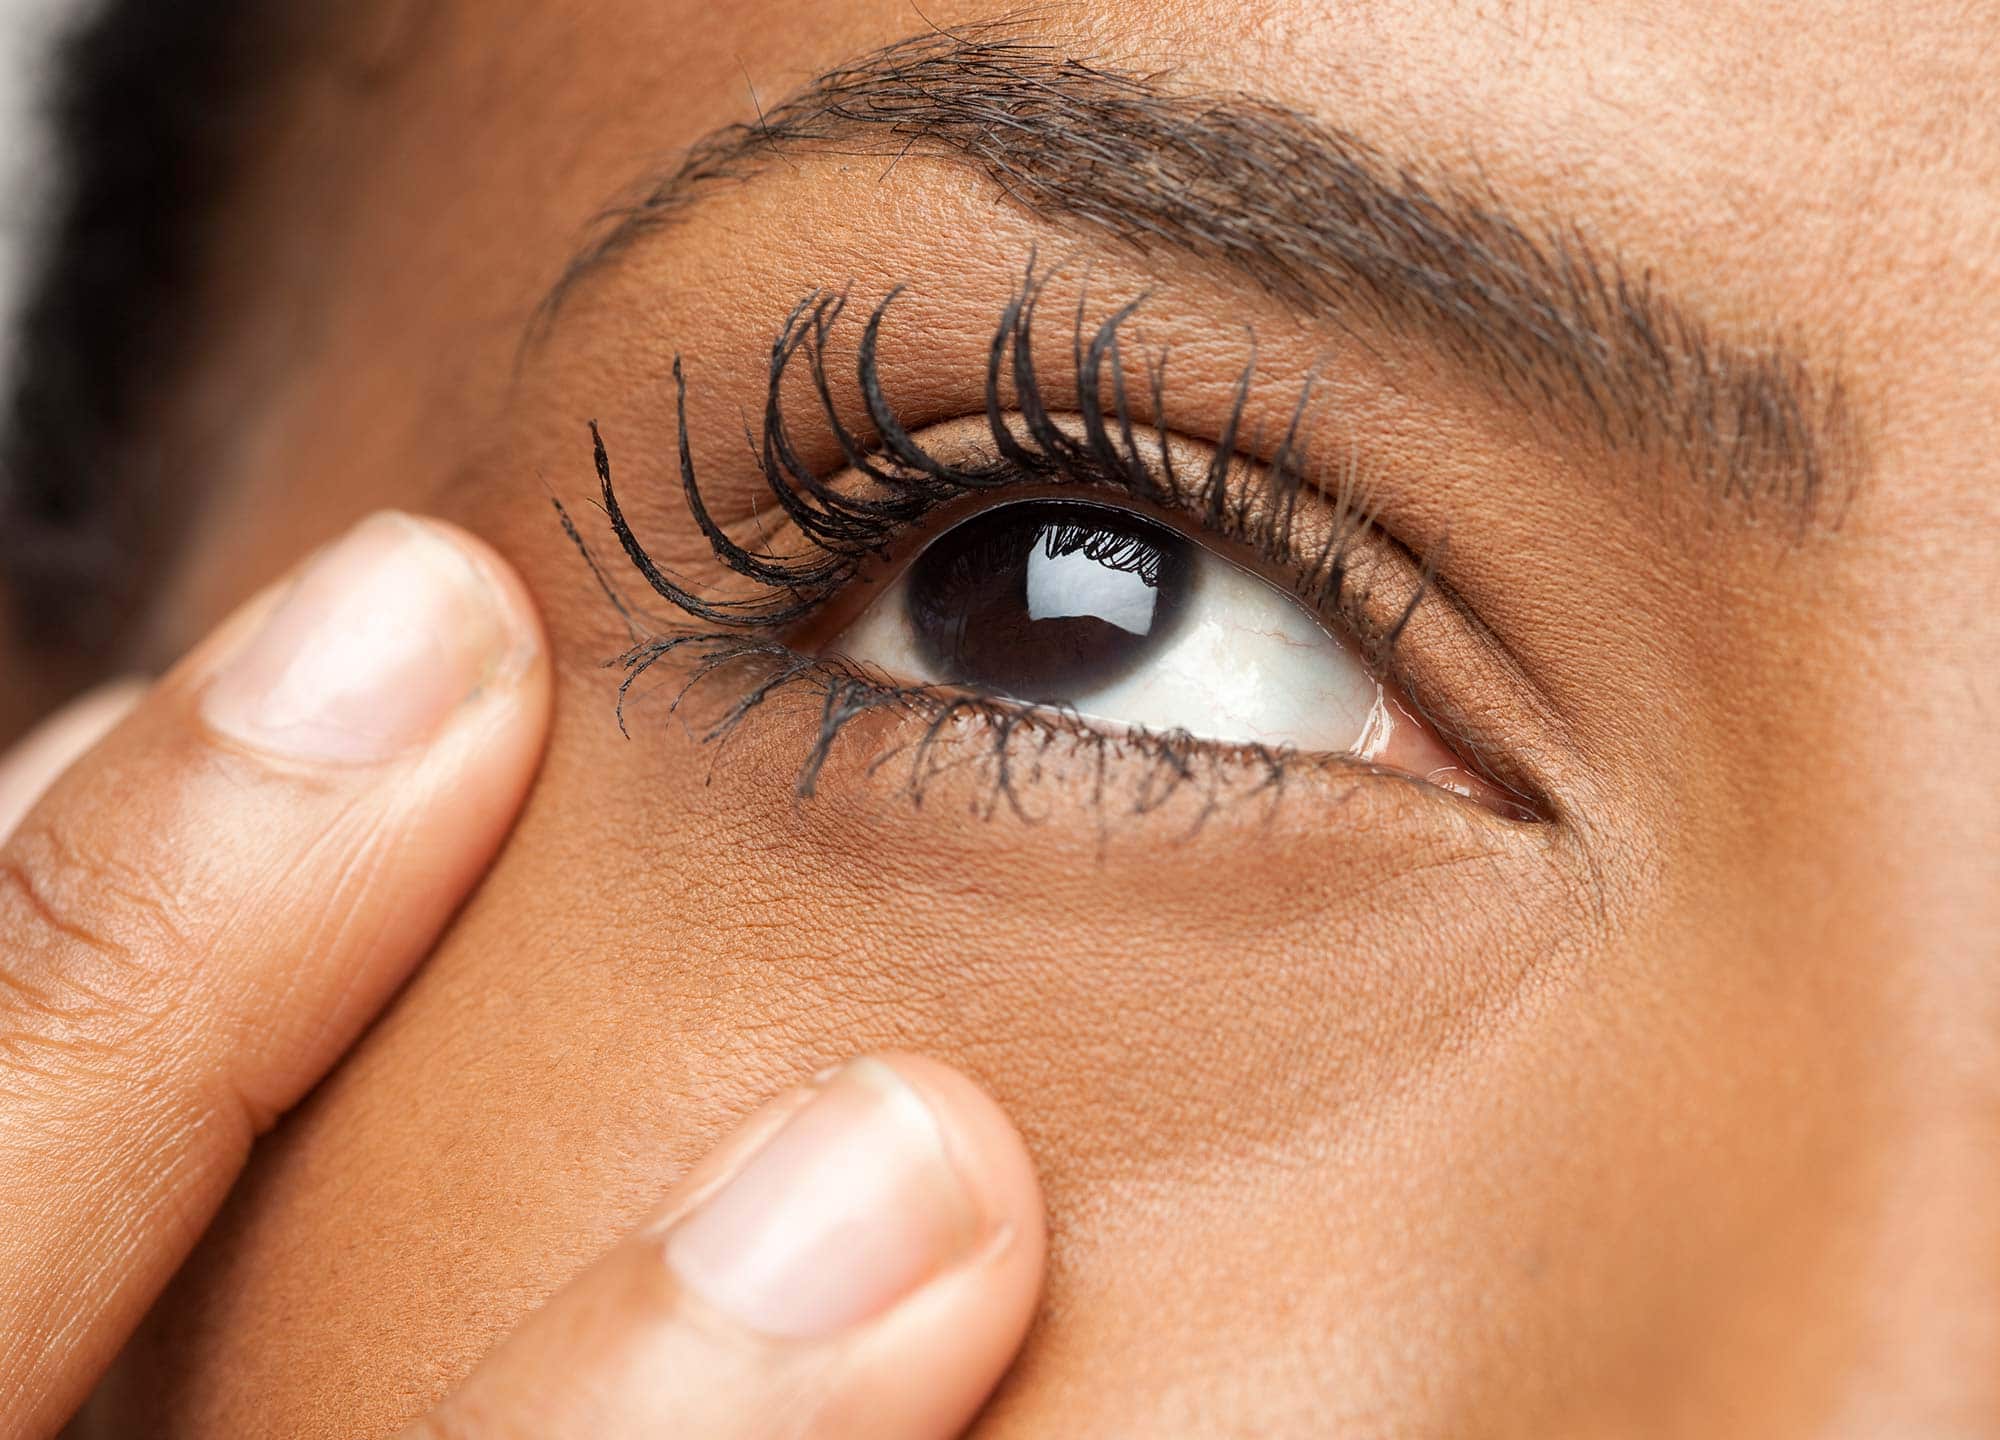 What Causes Puffy Eyes & How To Treat Them